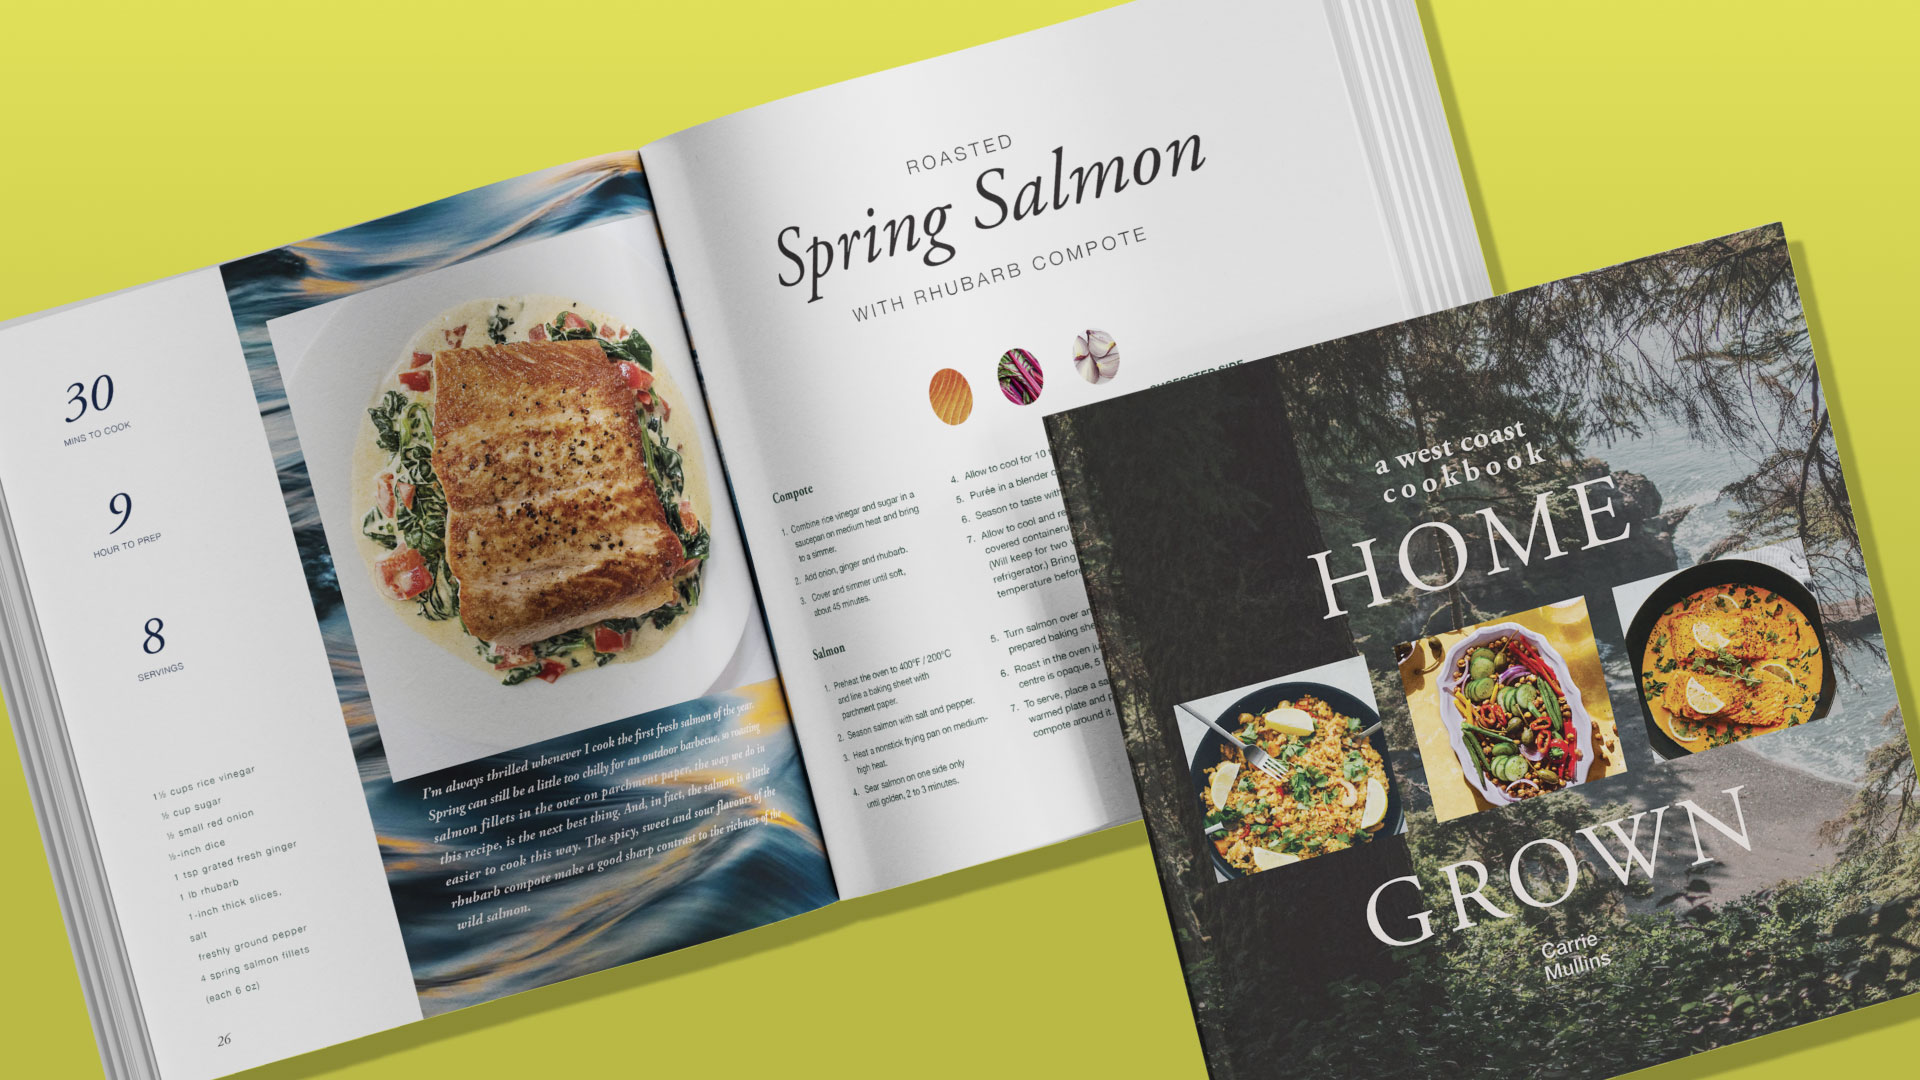 An image showing the cookbook cover in front of a recipe spread.